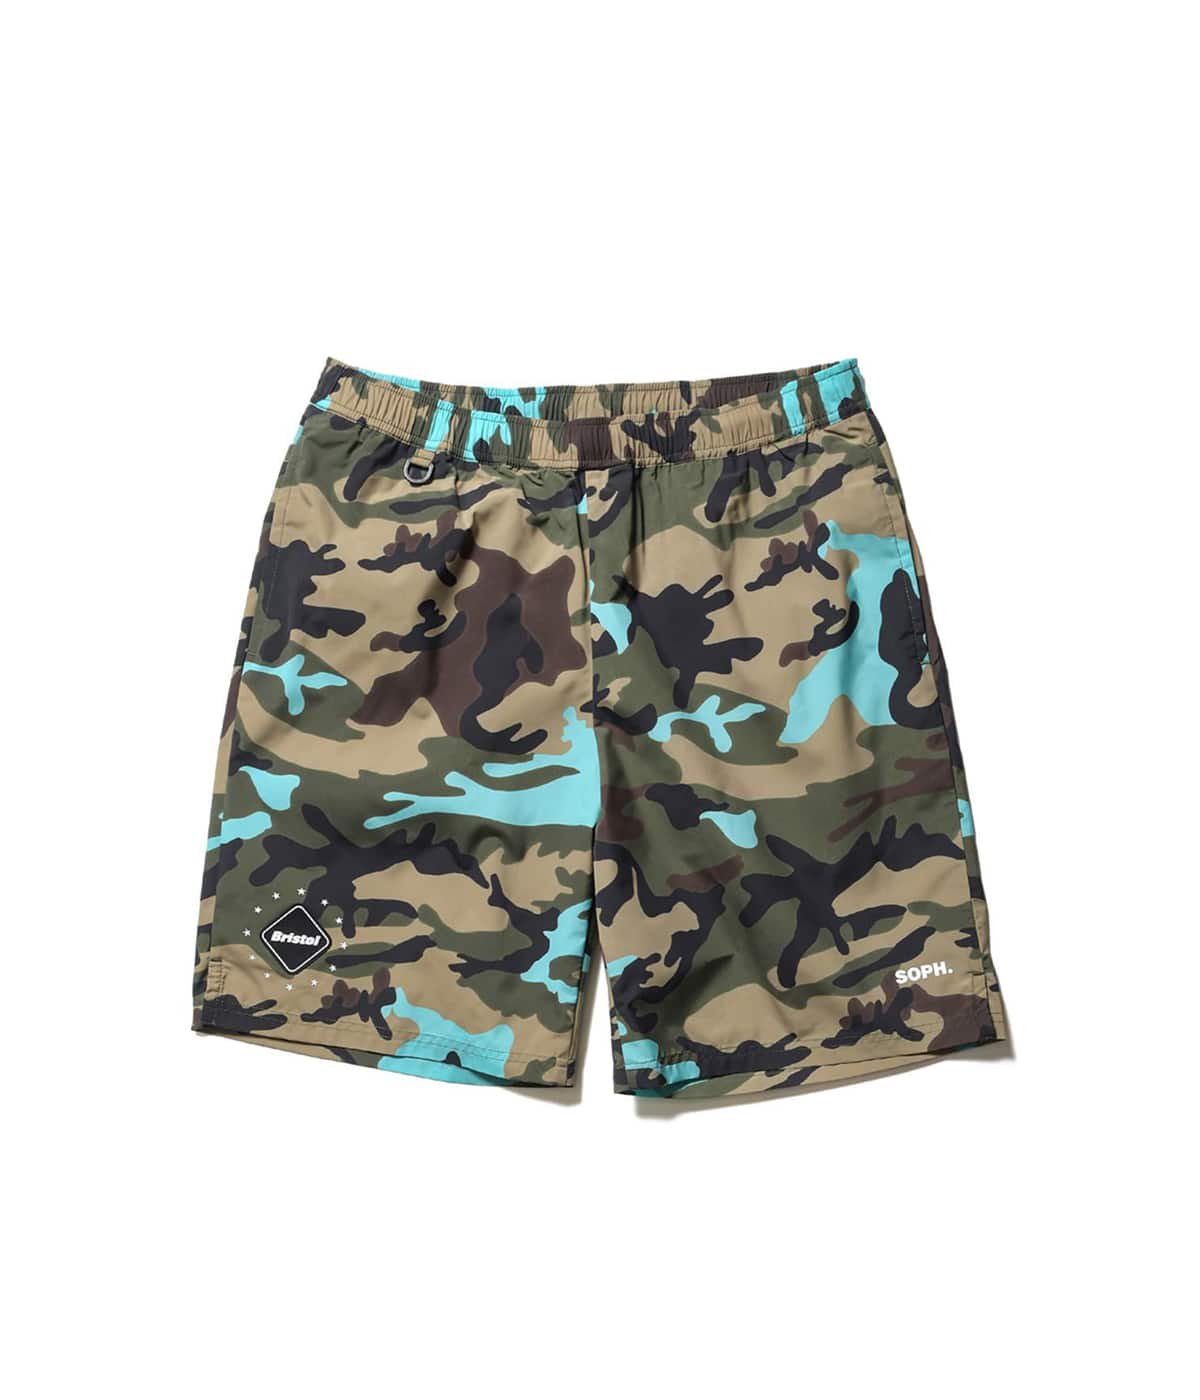 FCRB x NIKE BRISTOL CAMOUFLAGE  SHORTS M